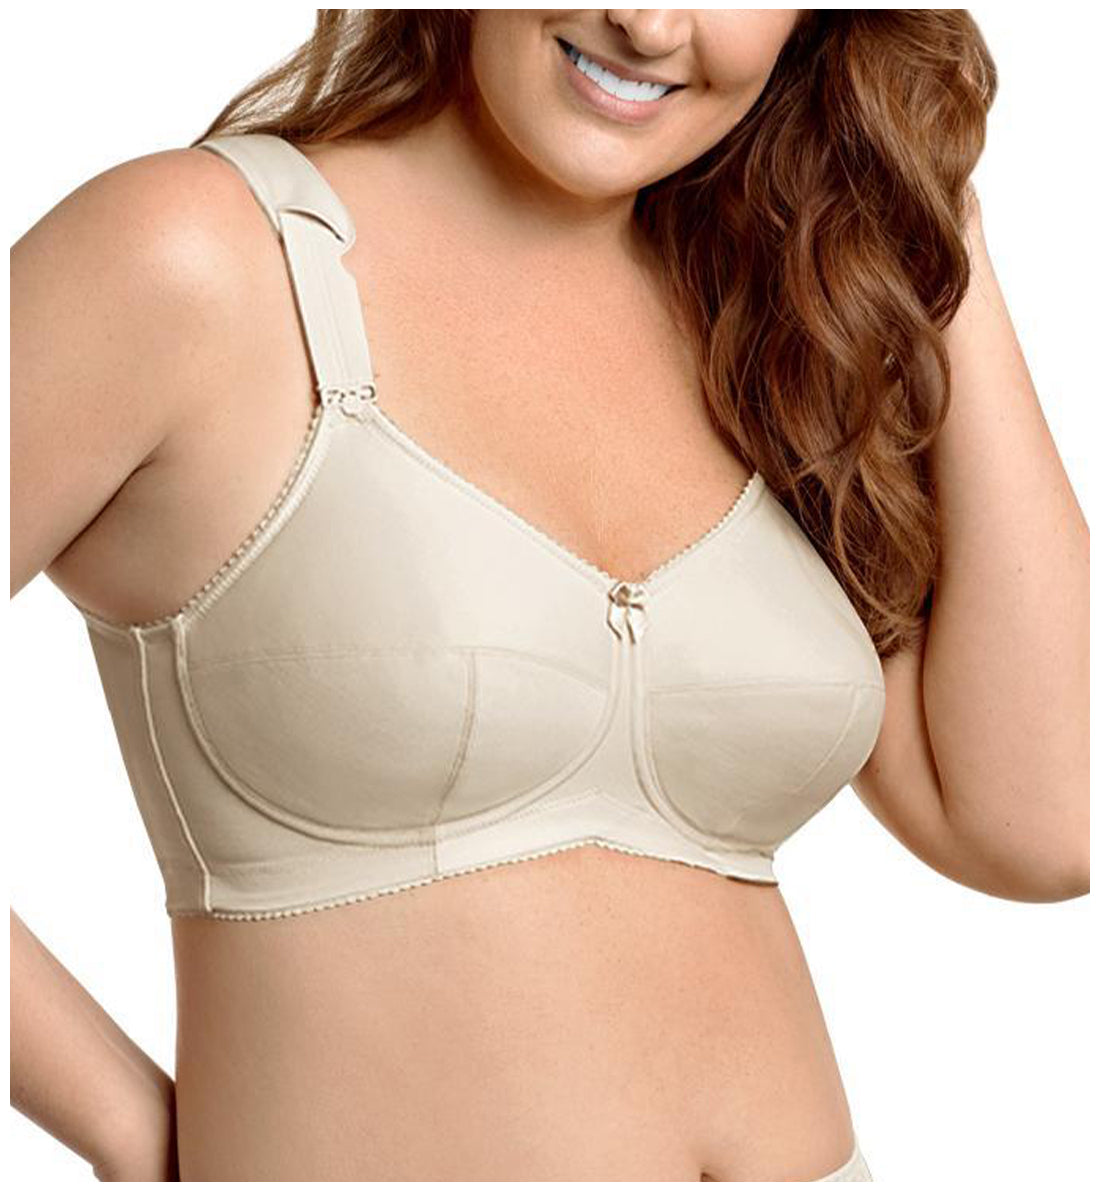 Elila Kaylee 3-Part Cup Full Support Softcup (1505),36I,Nude - Nude,36I